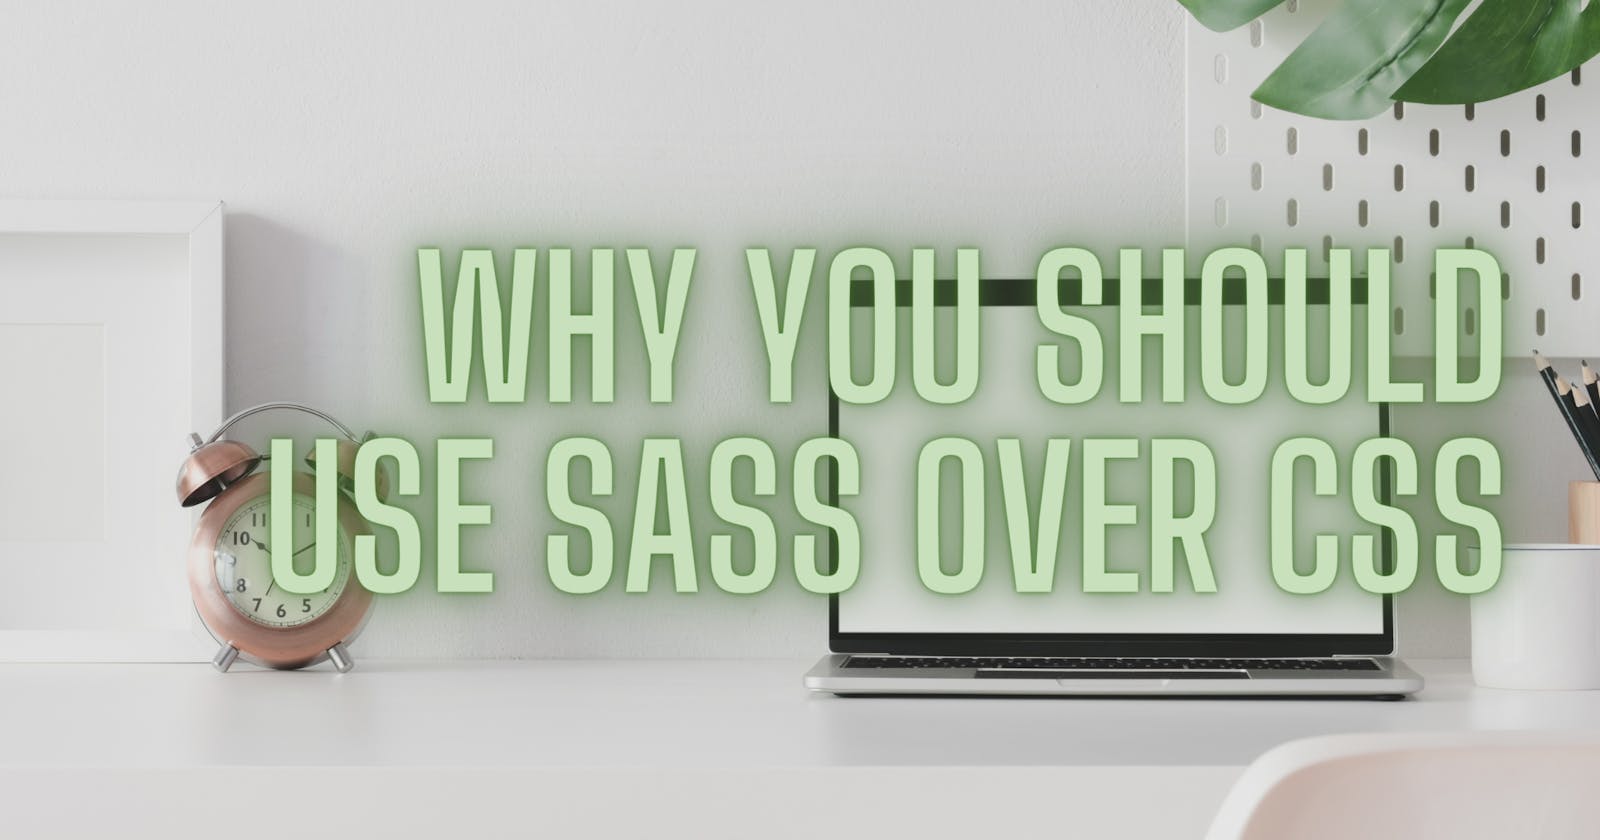 Why you should use Sass over CSS